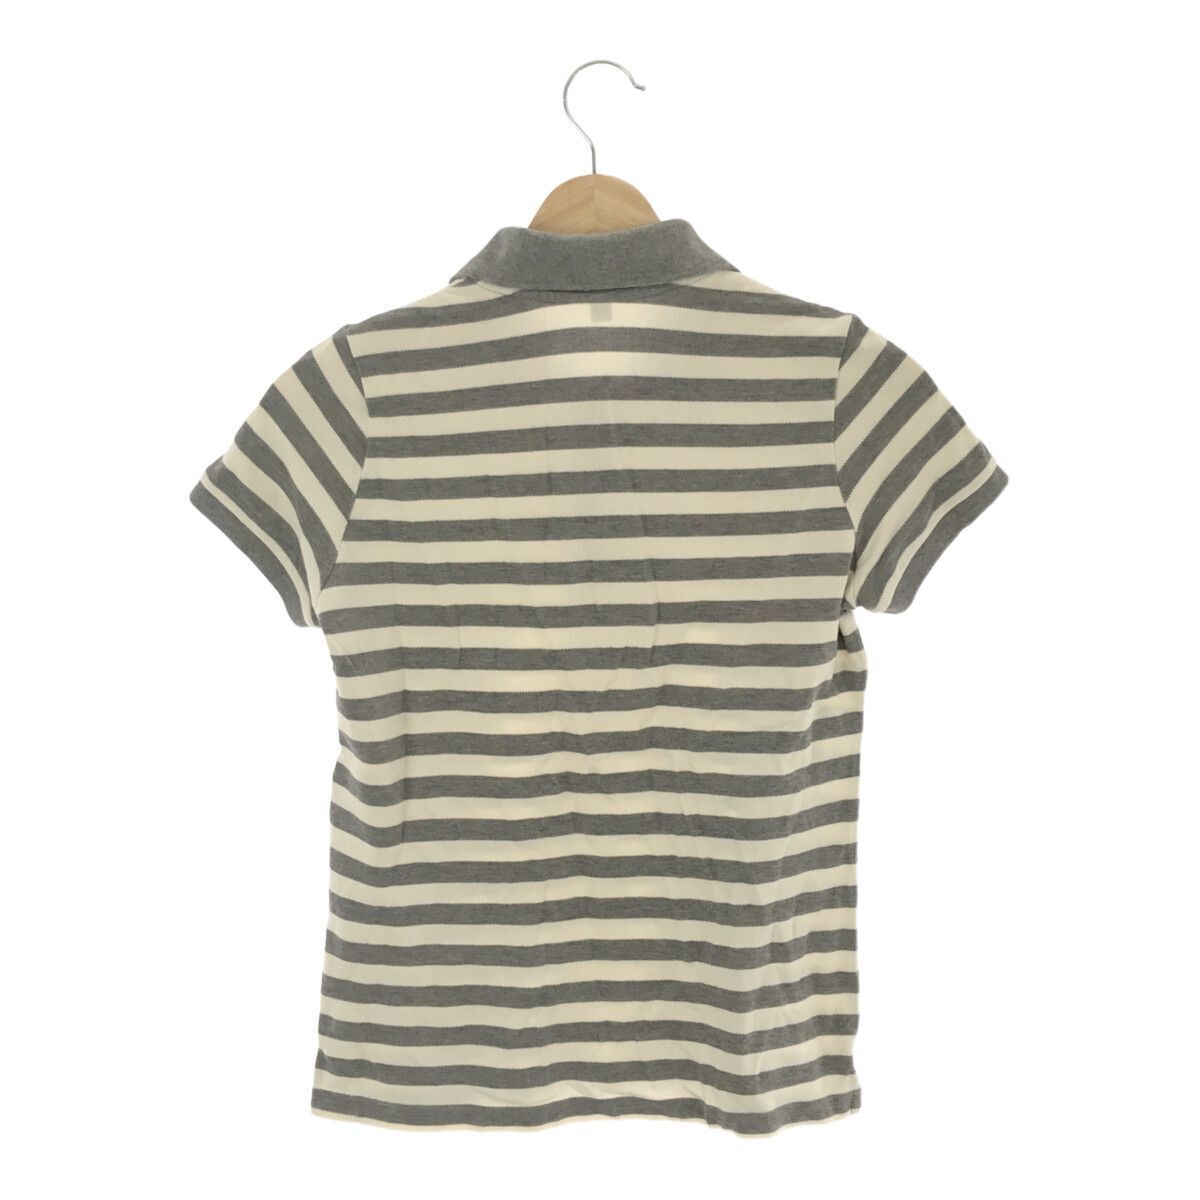 [ translation have ] UNIQLO Uniqlo tops polo-shirt short sleeves button lady's border gray M 901-3737 free shipping 